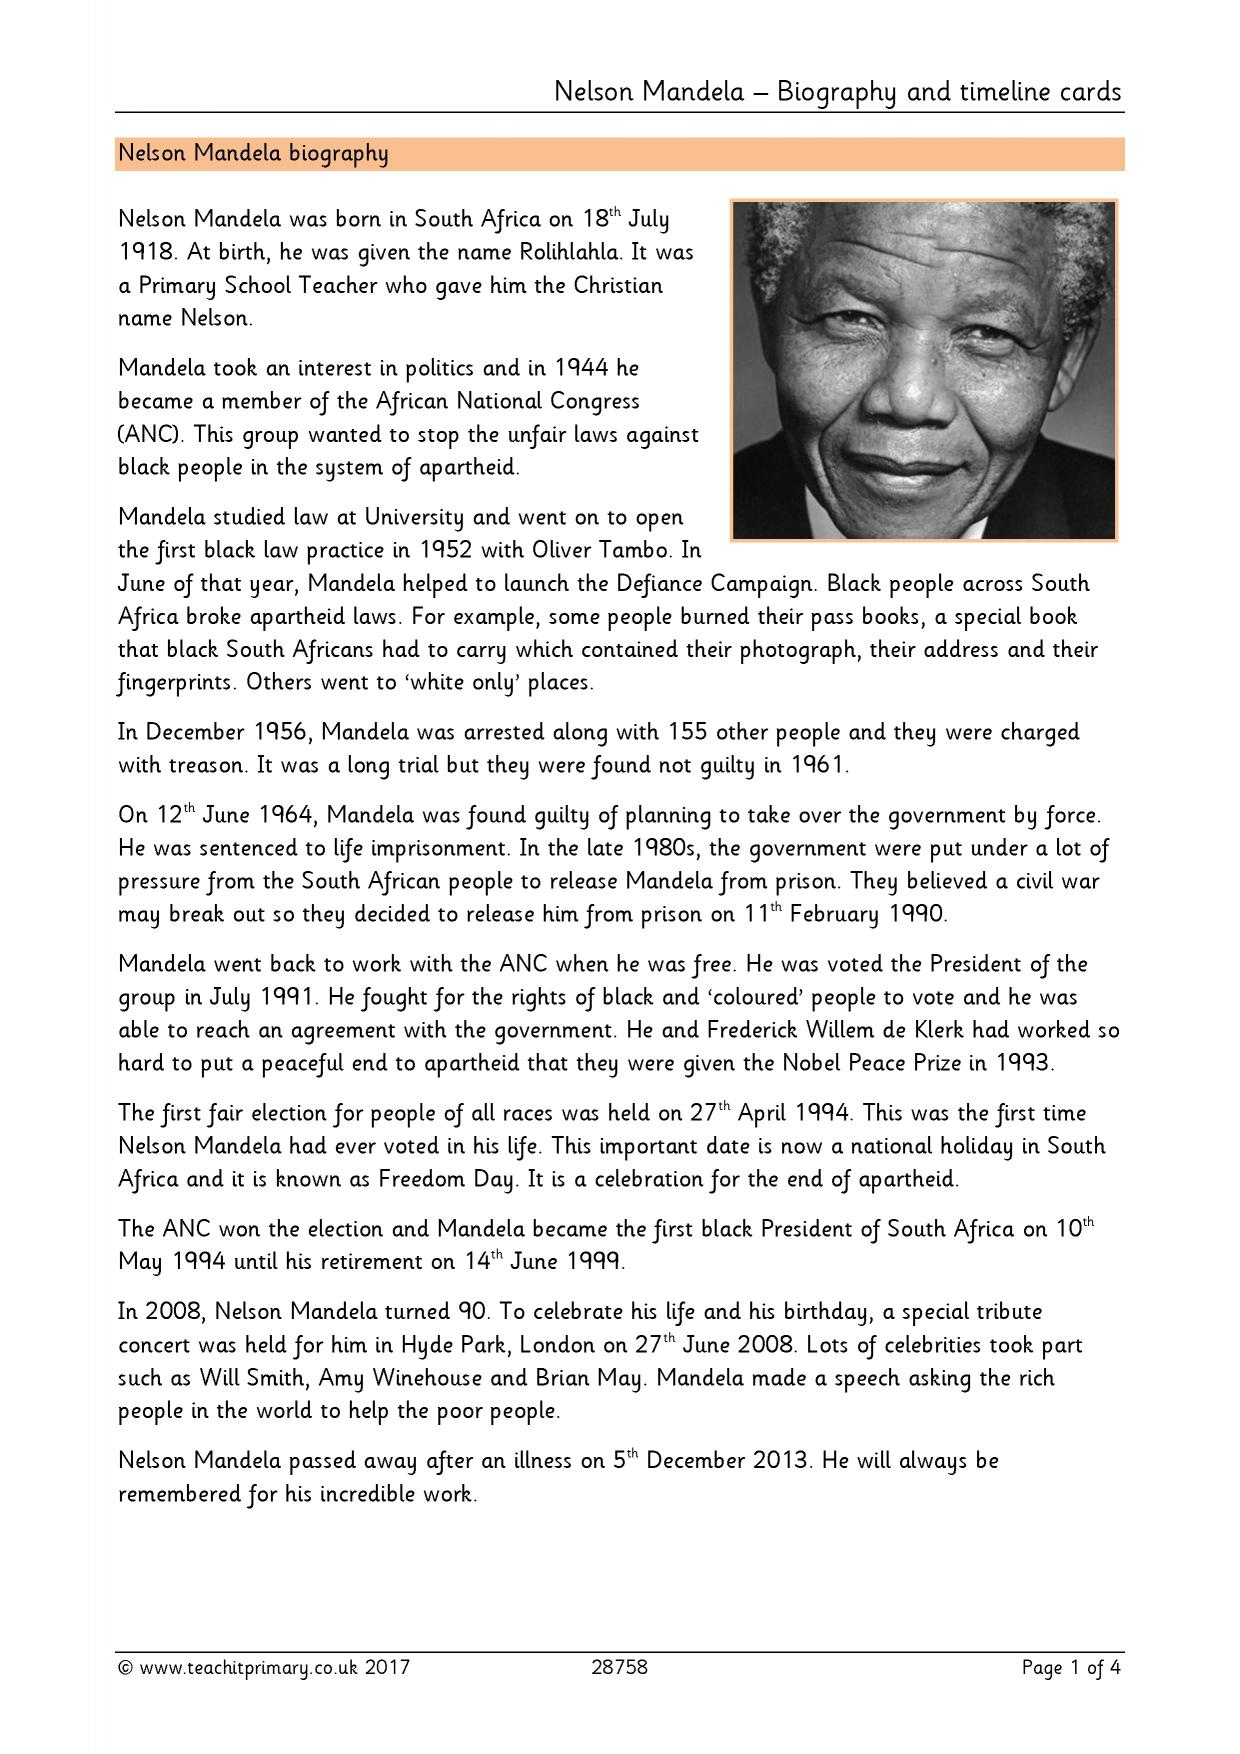 write a biography on nelson mandela in 200 words